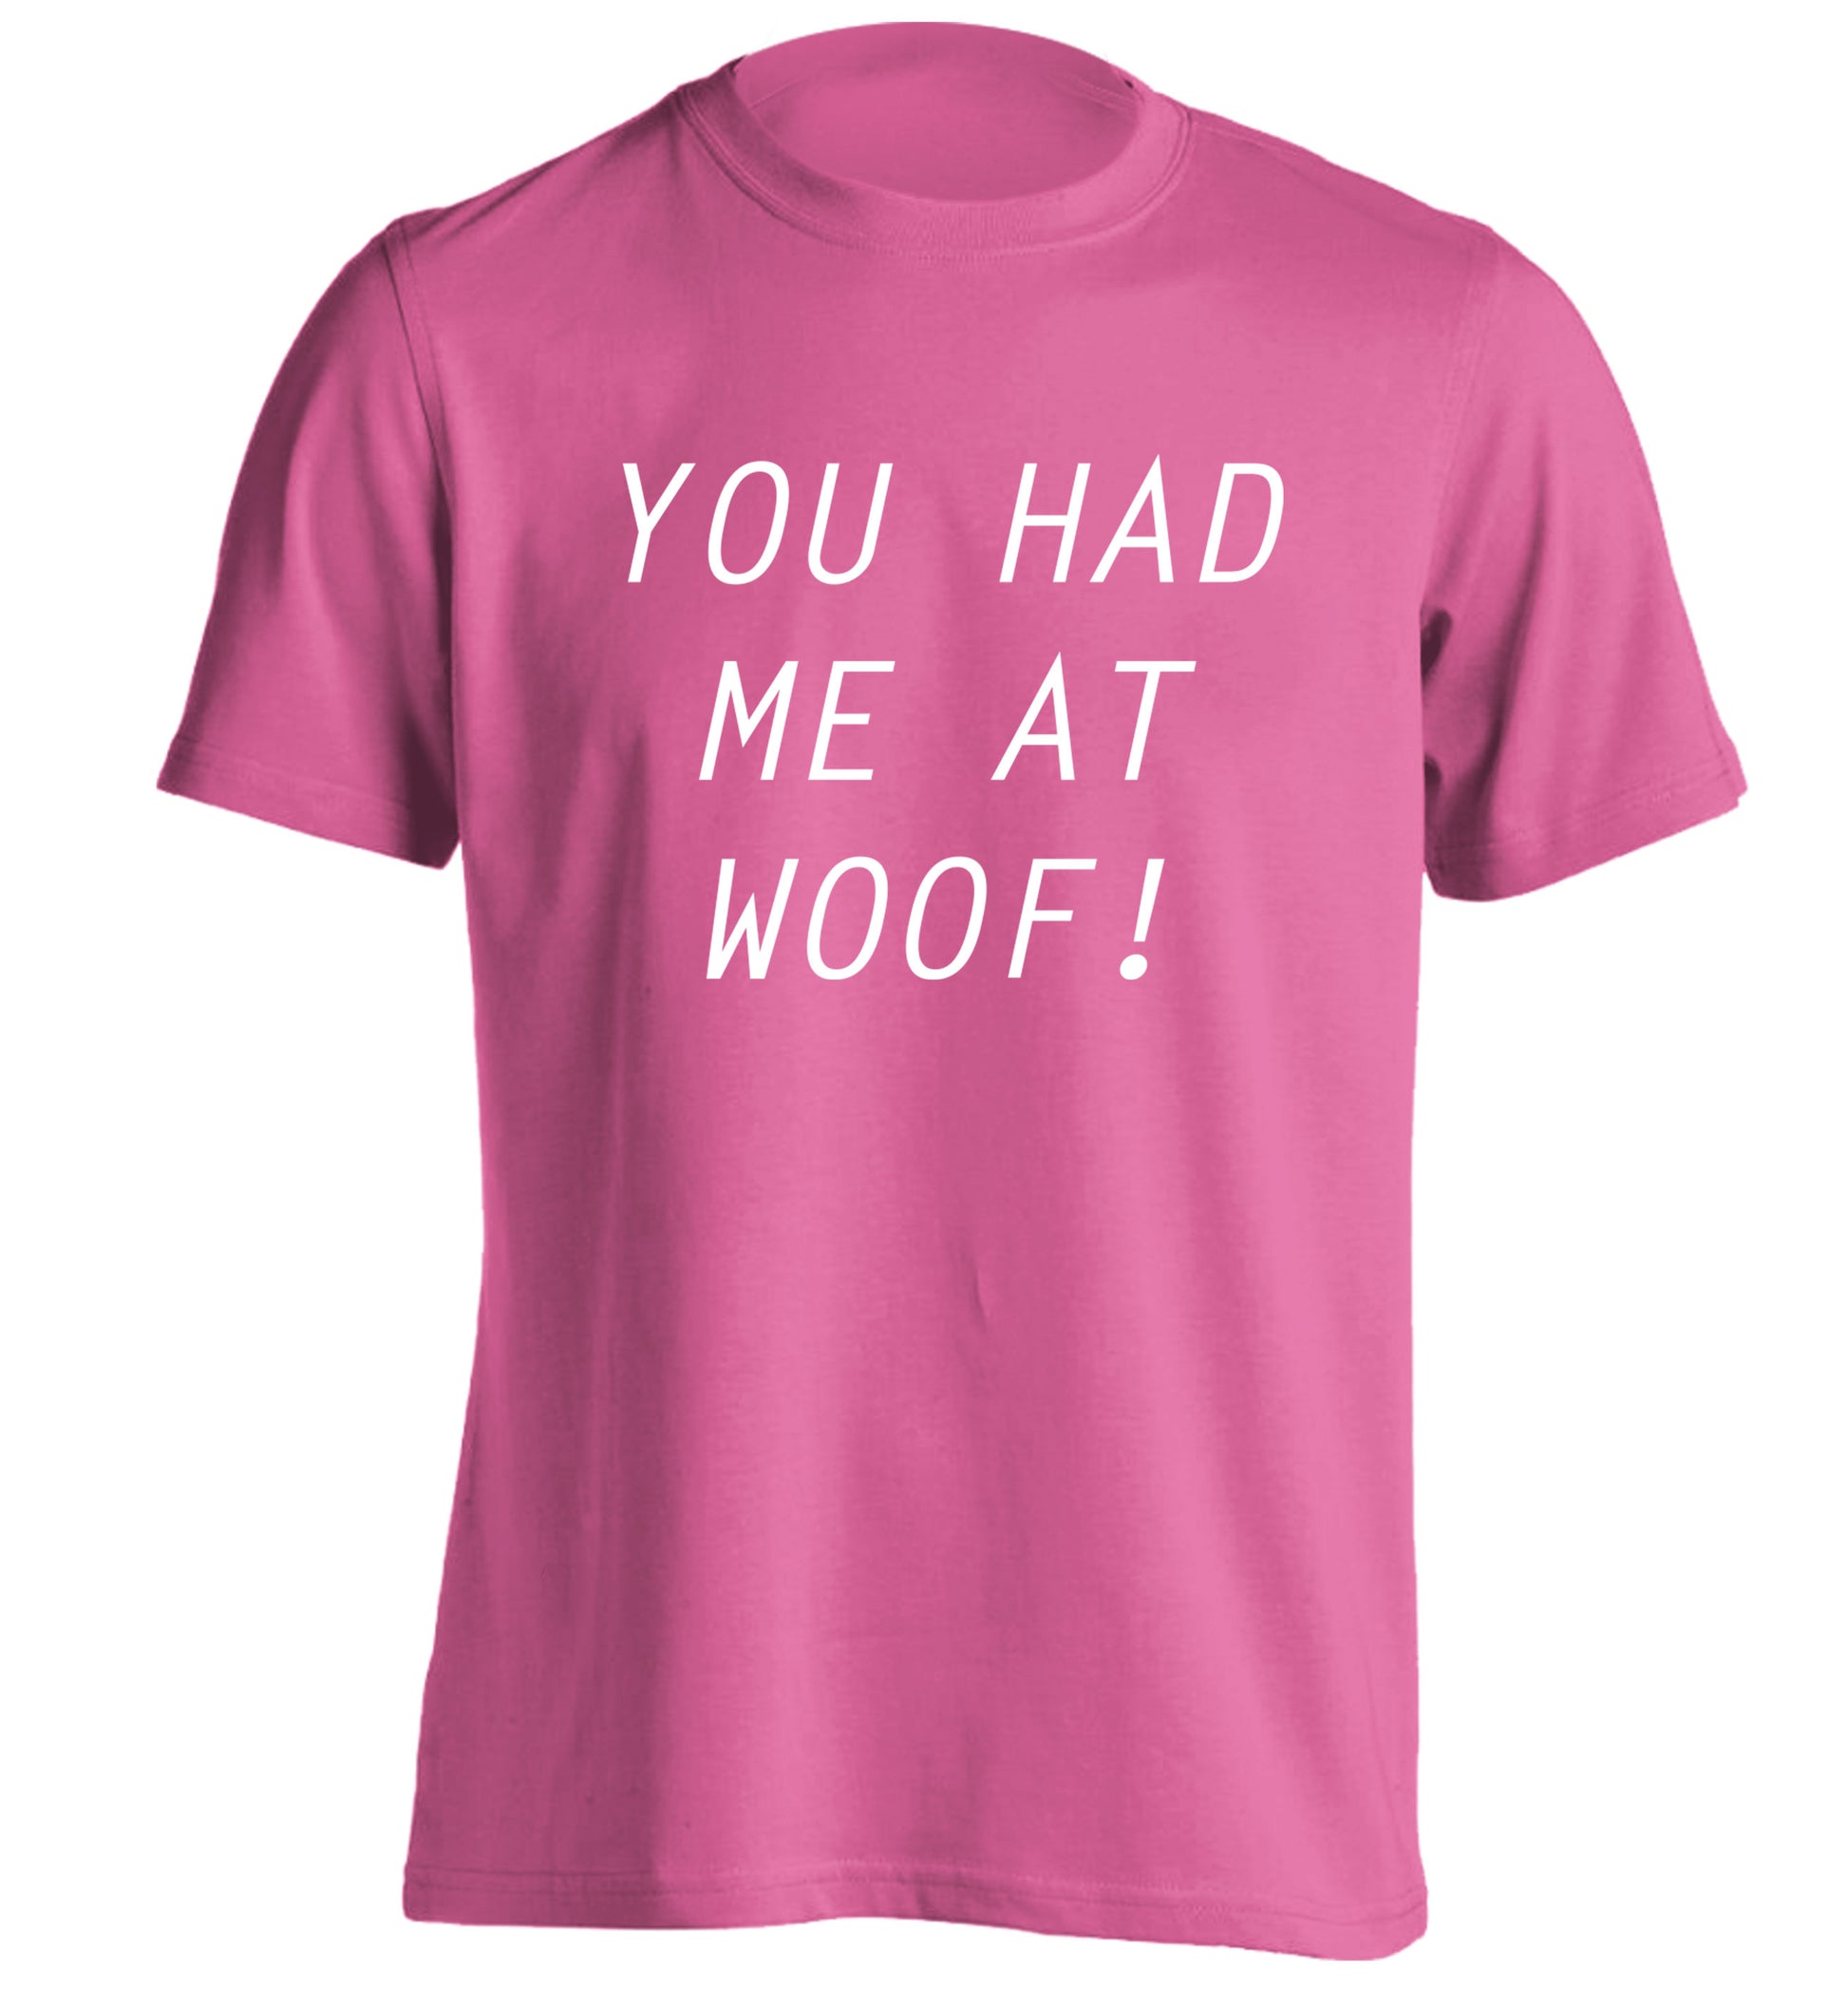 You had me at woof adults unisex pink Tshirt 2XL